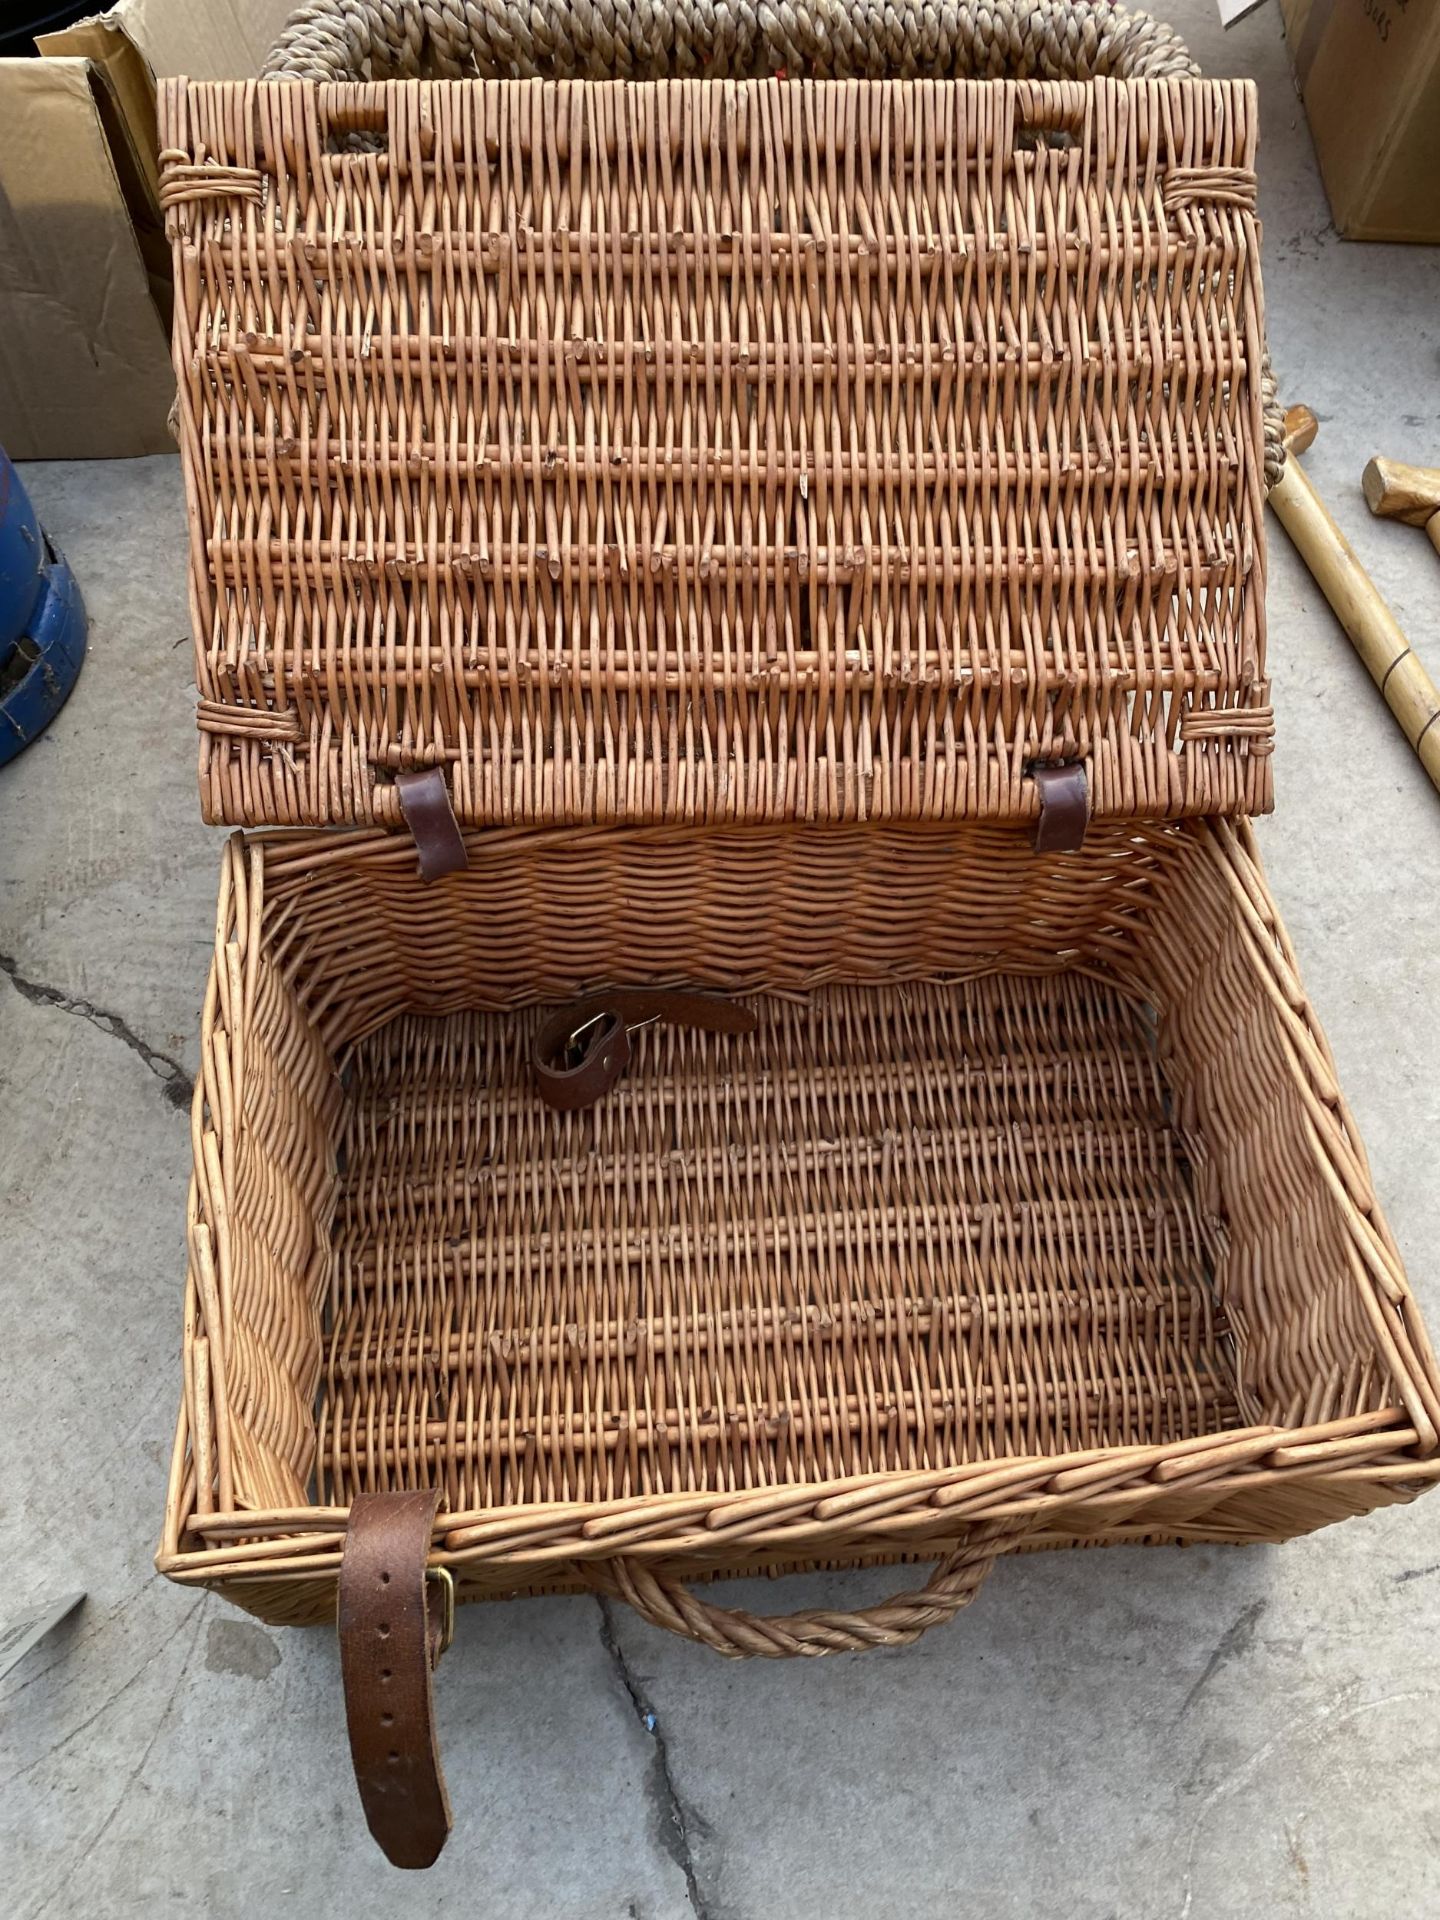 A WICKER PICNIC BASKET AND A FURTHER WICKER EFFECT LOG BASKET - Image 3 of 5